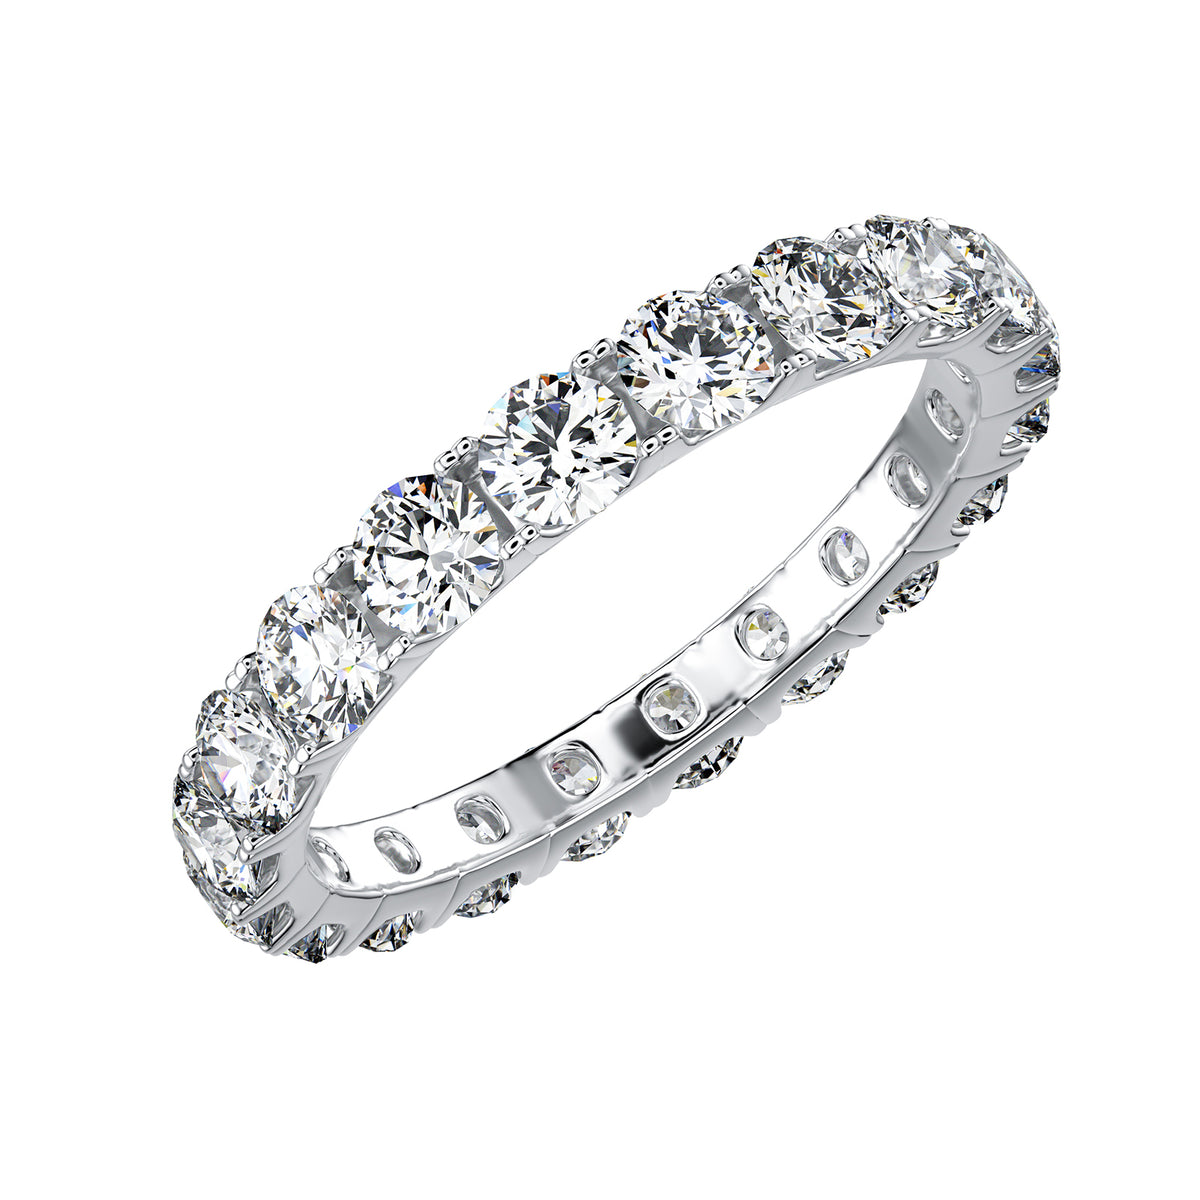 Full Accented Eternity Moissanite Diamond Engagement Band in Yellow/White Gold